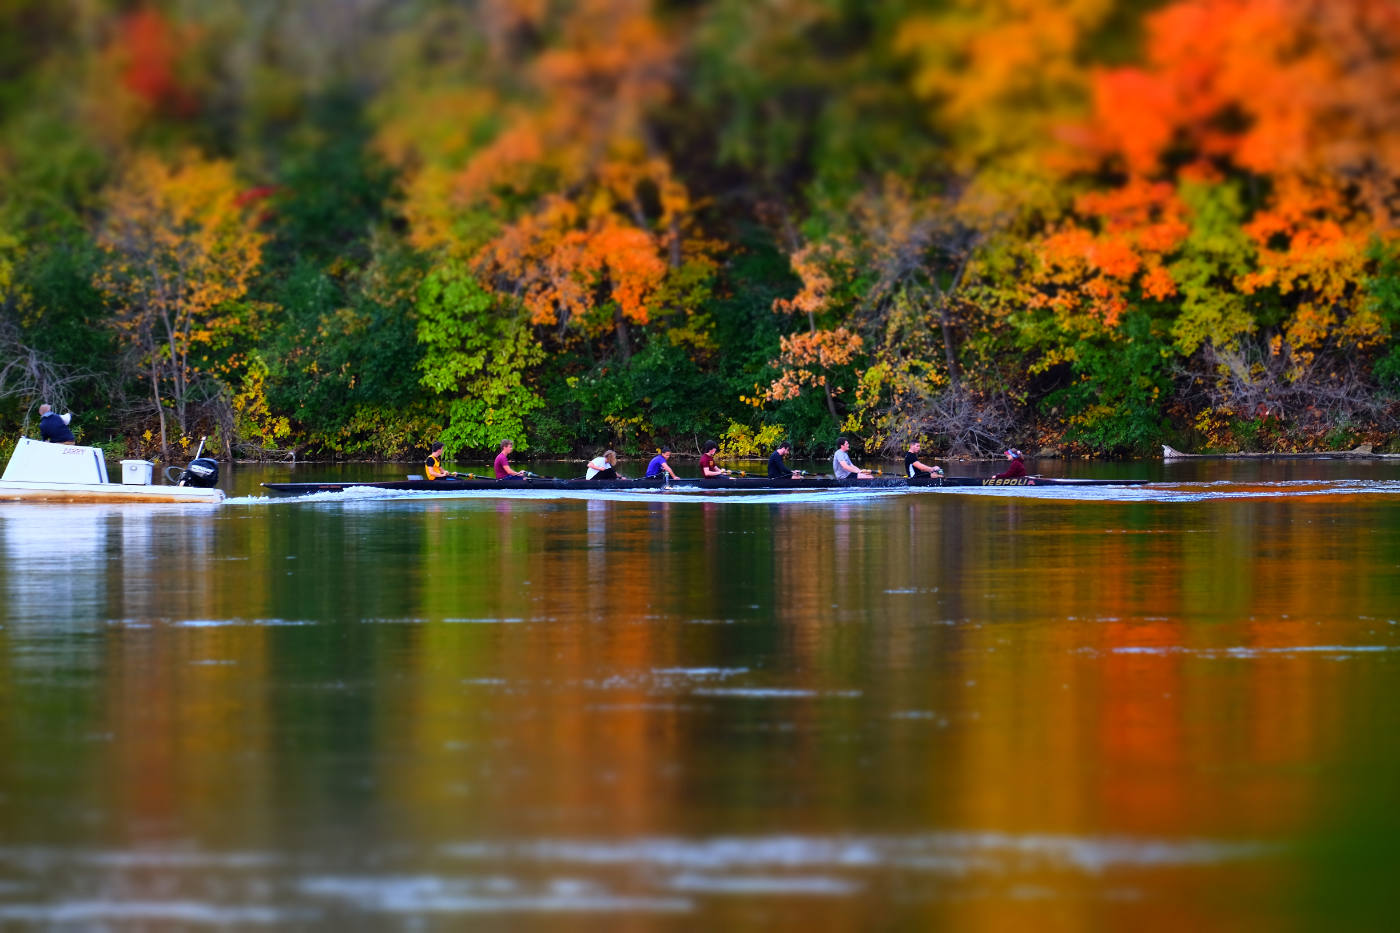 Crew rowing in a long low boat on the river with fall color trees on banks in background